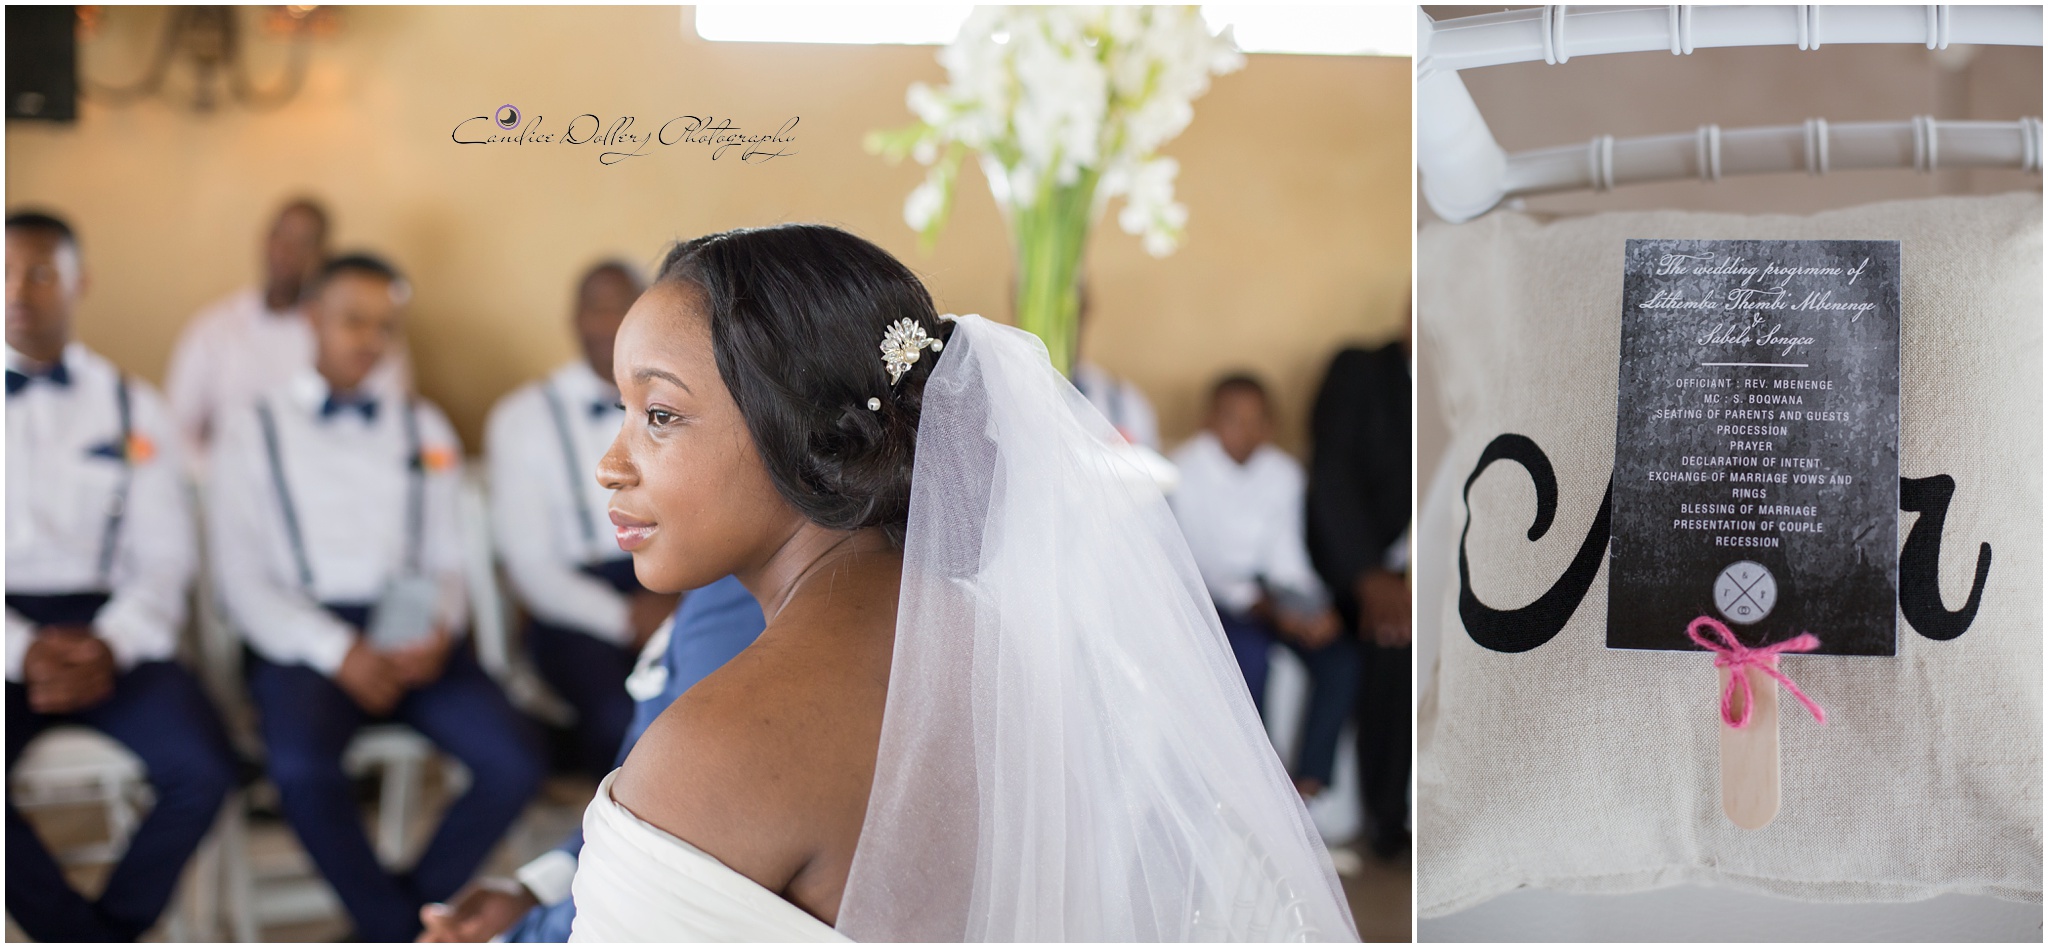 Thembi & Sabelo's Wedding - Candice Dollery Photography_8279